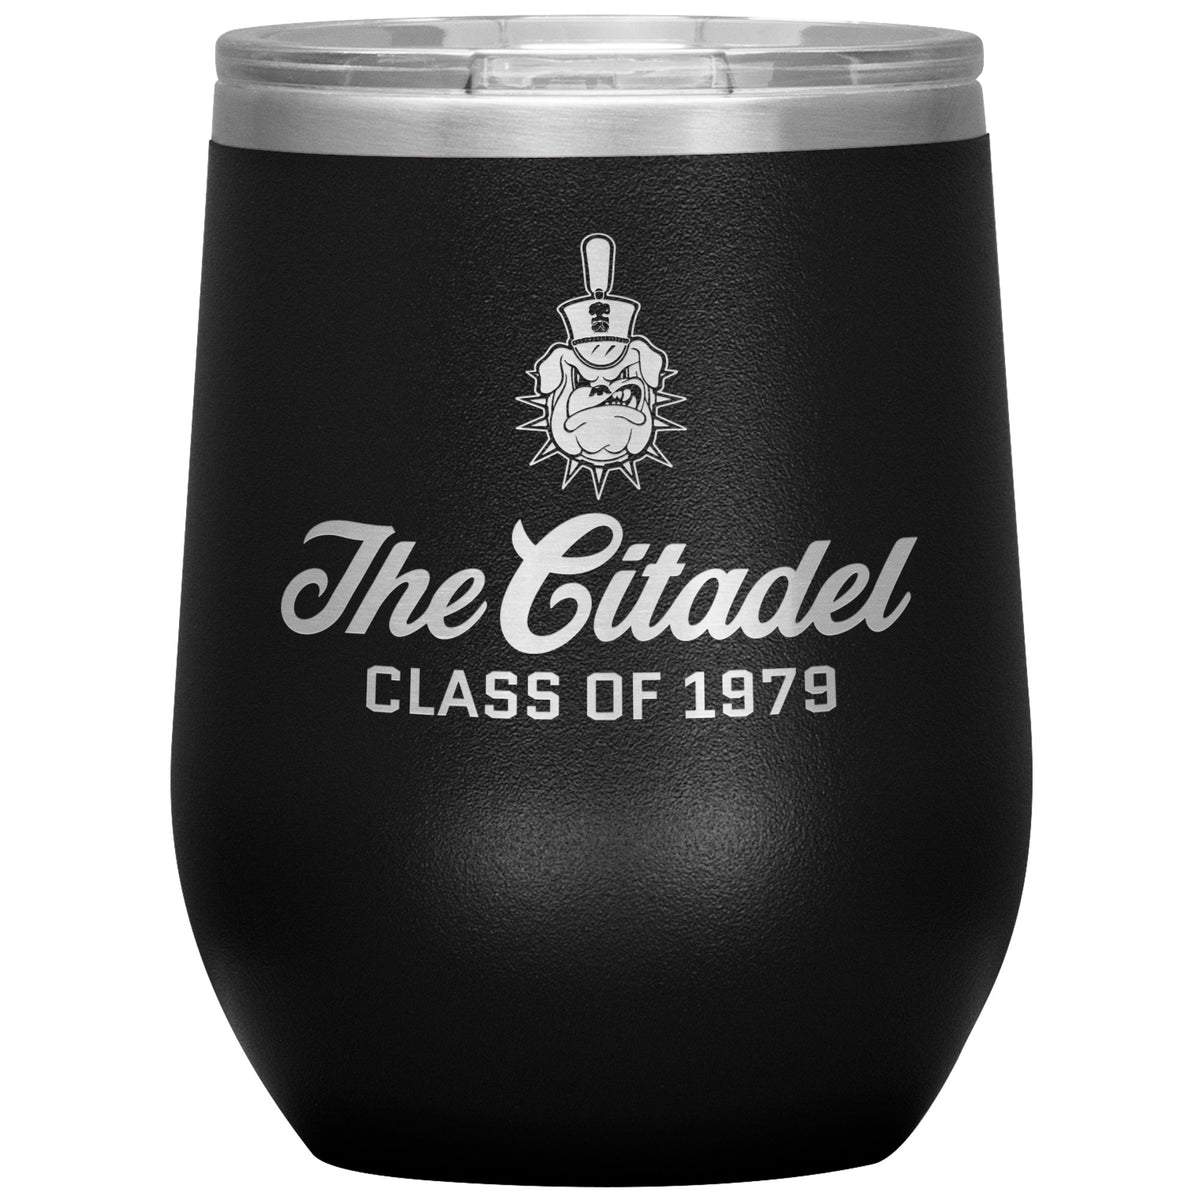 The Citadel Spike, Class of 1979, Wine Insulated Tumbler - 12oz